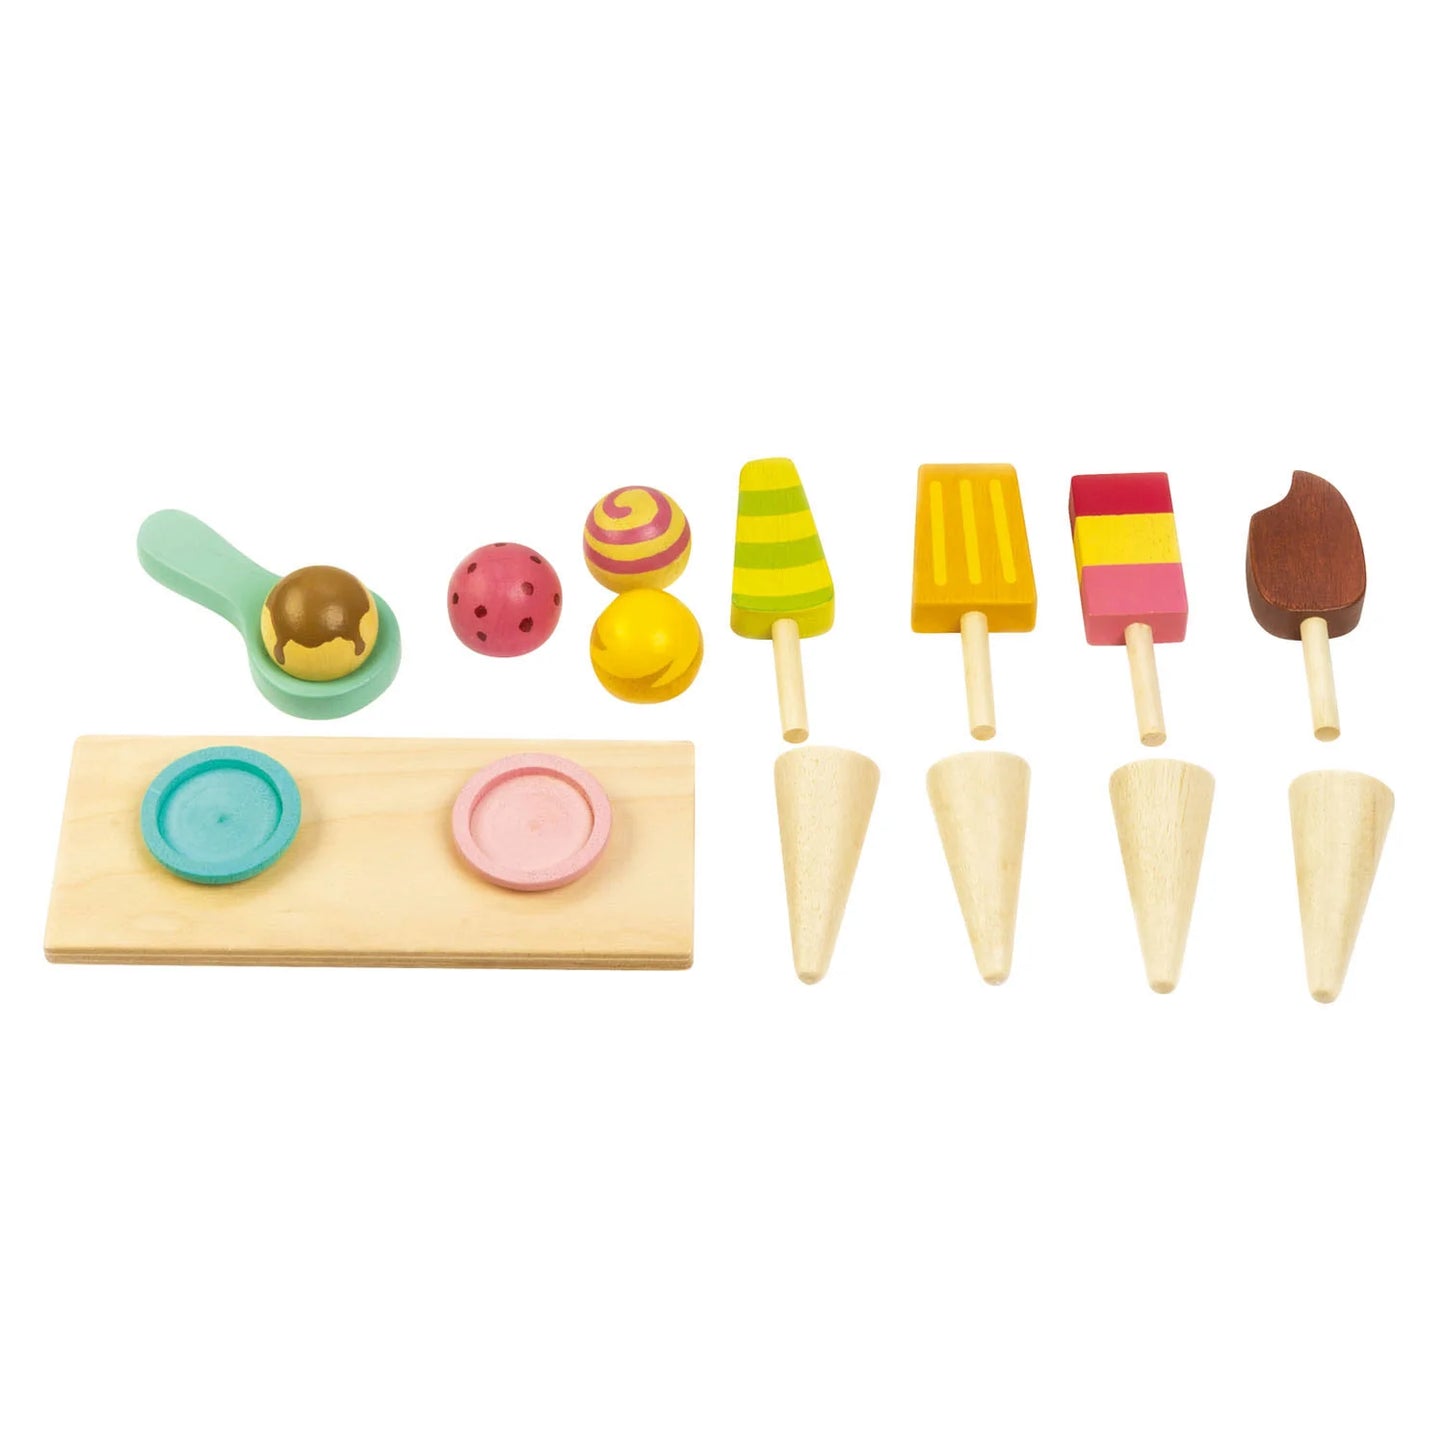 Tender Leaf Toys Ice Cream Cart Play Set - Little Reef and Friends